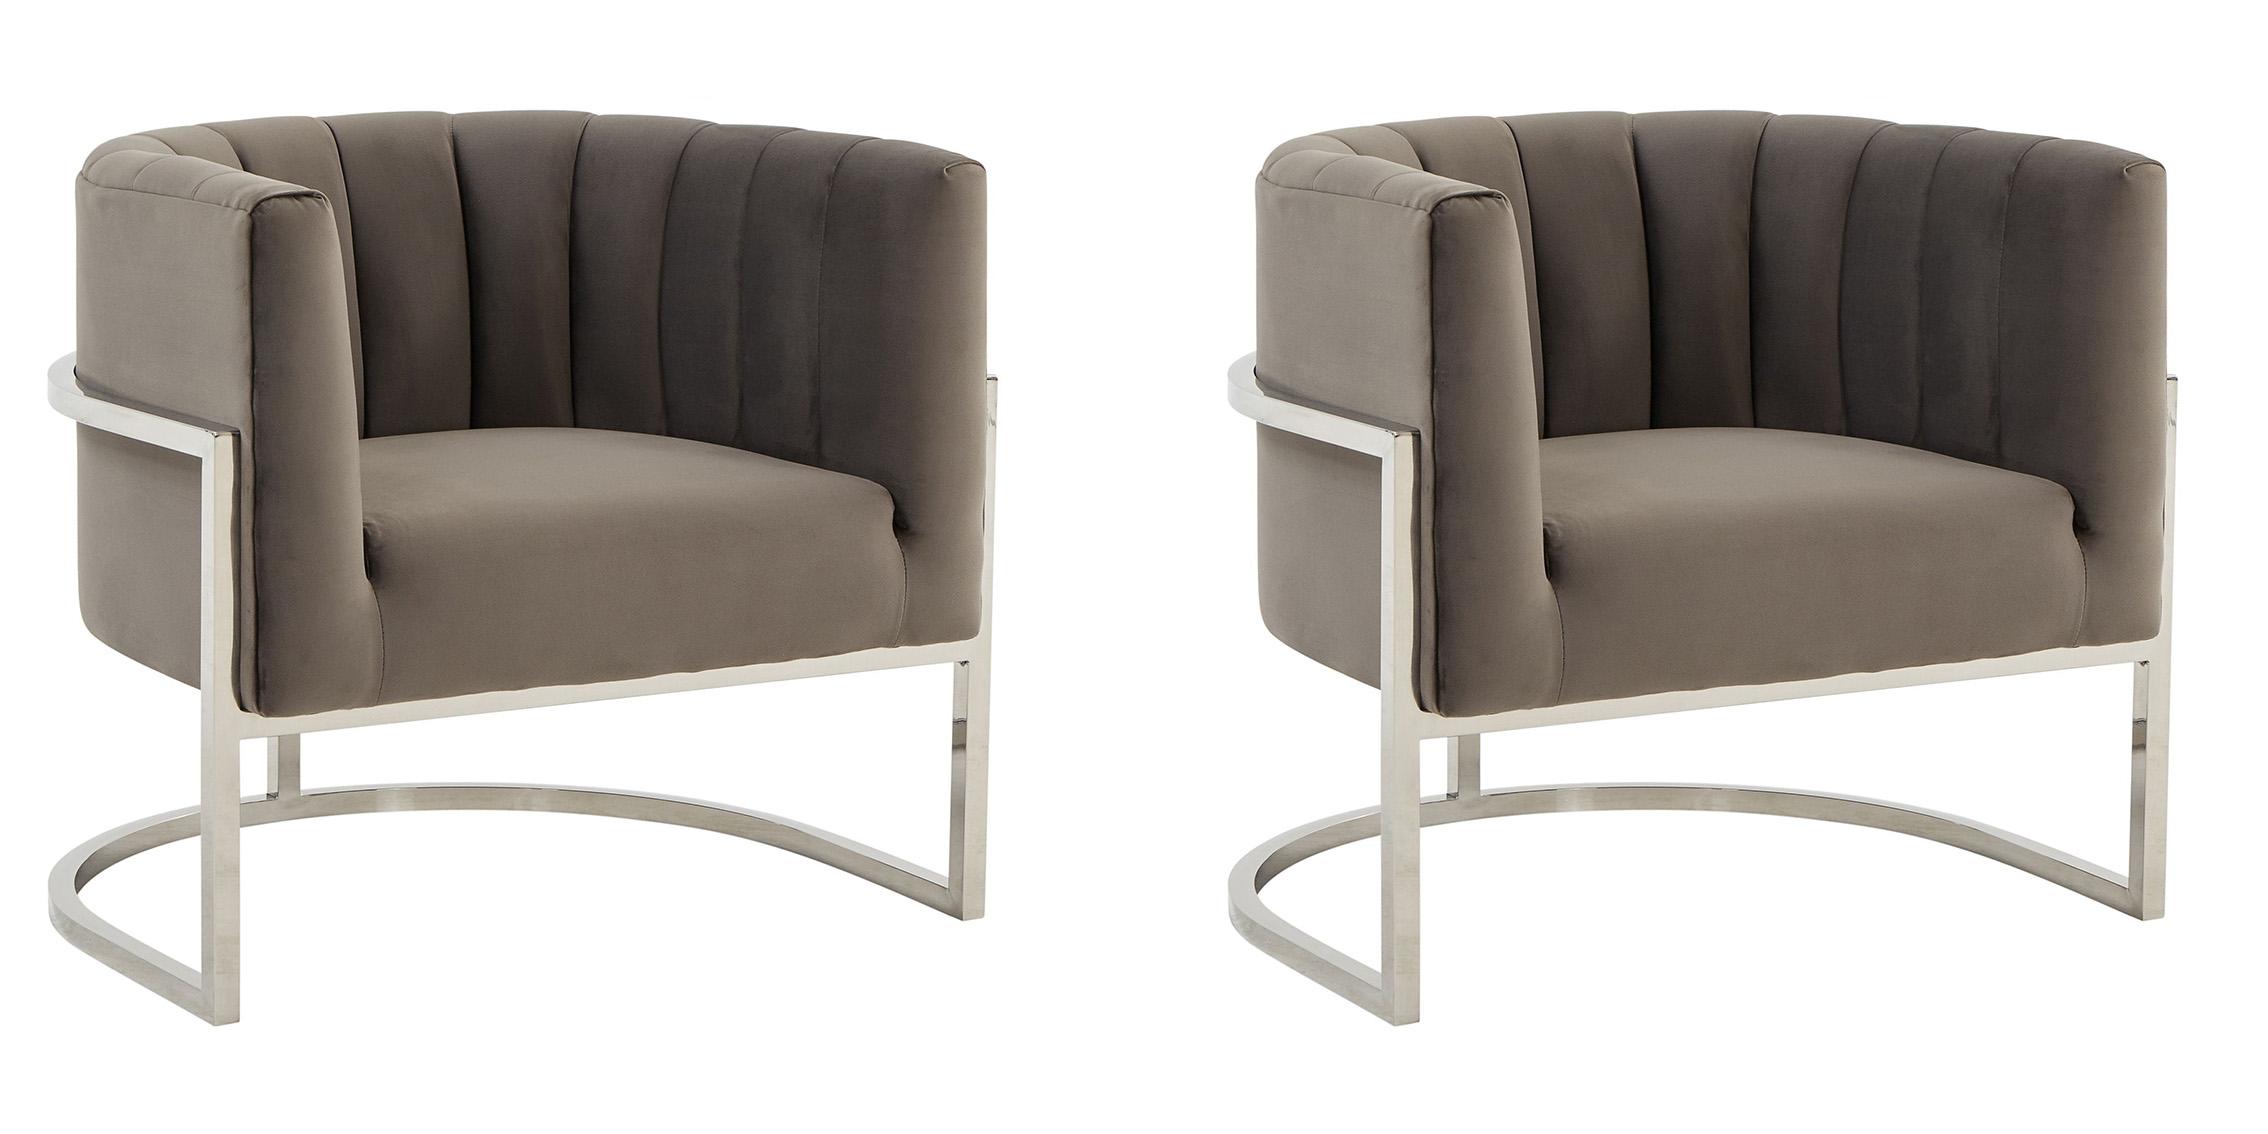 Contemporary, Modern Accent Chair Set VGRHAC-406-GRAY-Set-2 VGRHAC-406-GRAY-Set-2 in Chrome, Gray Fabric